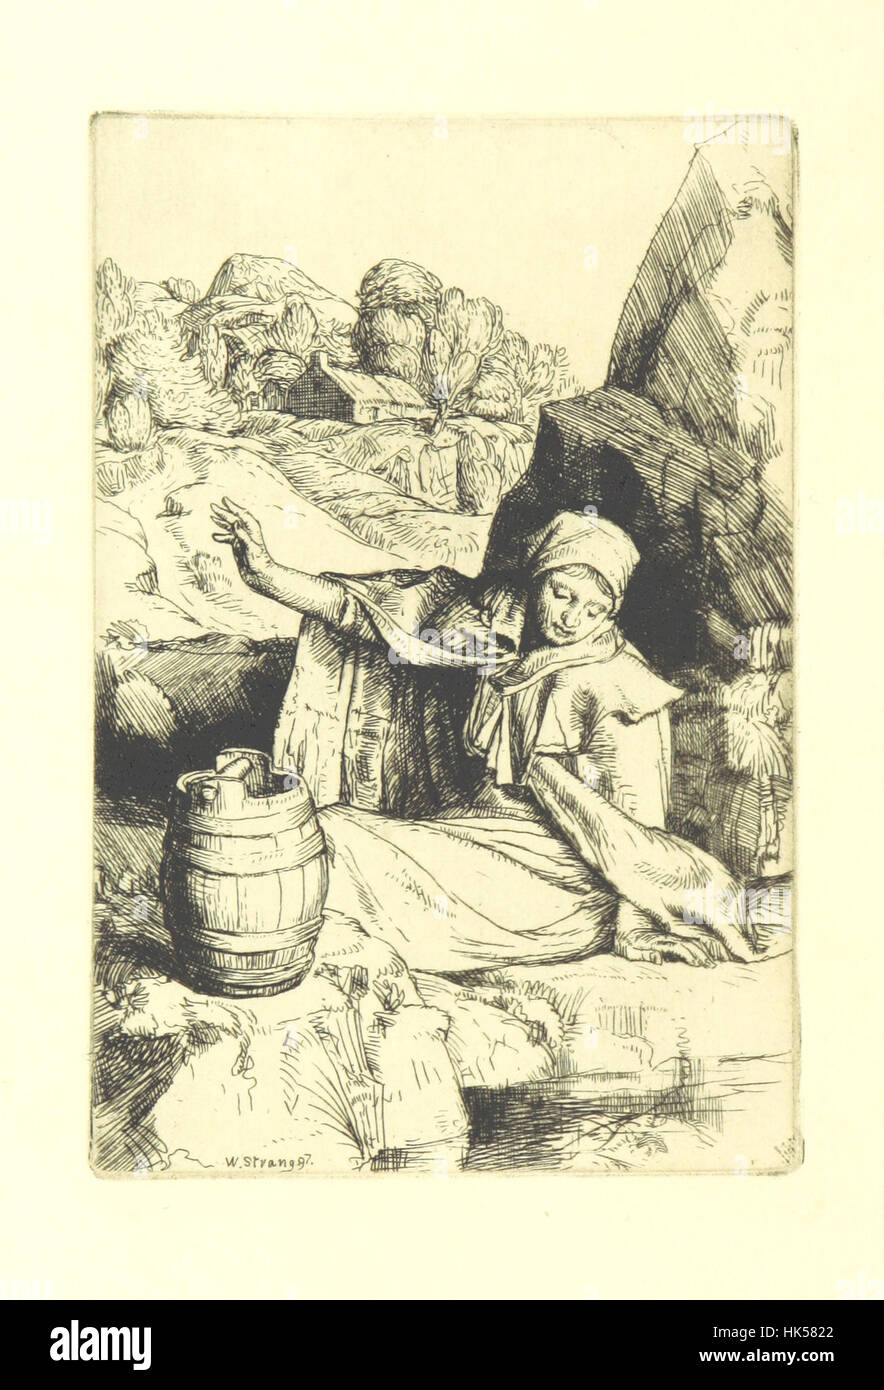 A Book of Ballads ... With five etchings by W. Strang Image taken from page 14 of 'A Boo Stock Photo